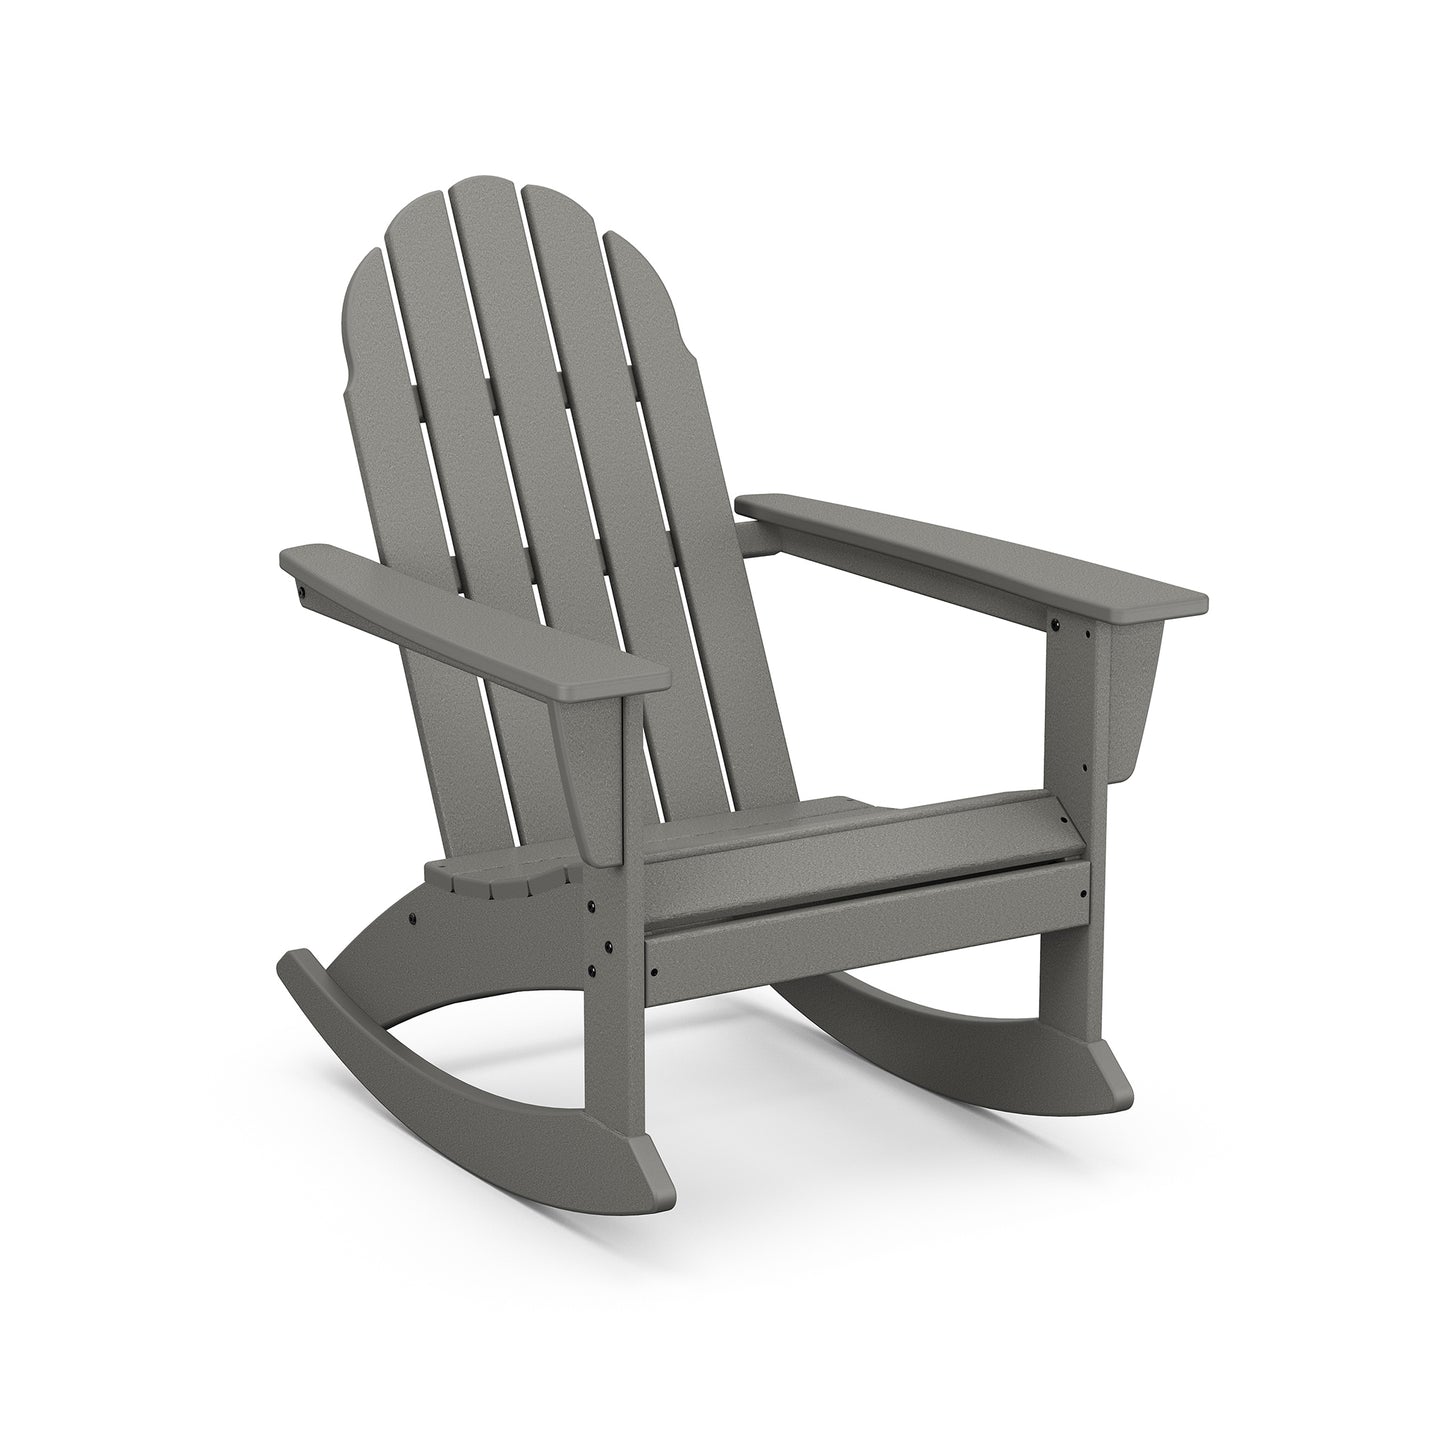 A single gray POLYWOOD Vineyard Adirondack rocking chair, featuring a contoured back and flat arms, stands isolated on a white background.